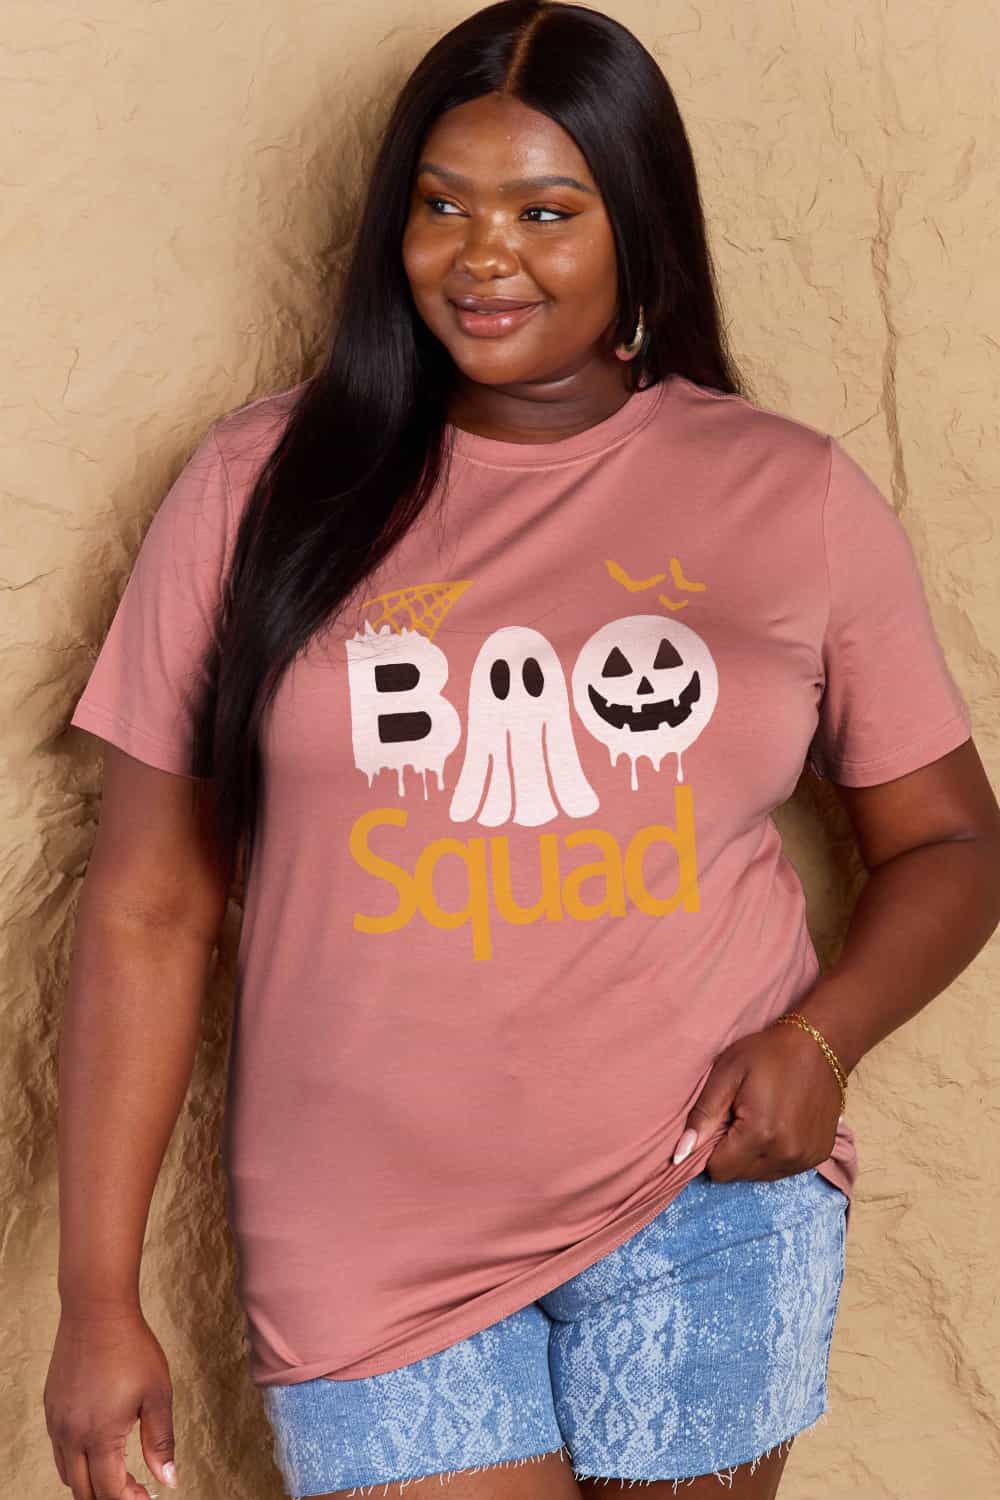 Full Size BOO SQUAD Graphic Cotton T-Shirt - Pink / S - T-Shirts - Shirts & Tops - 19 - 2024